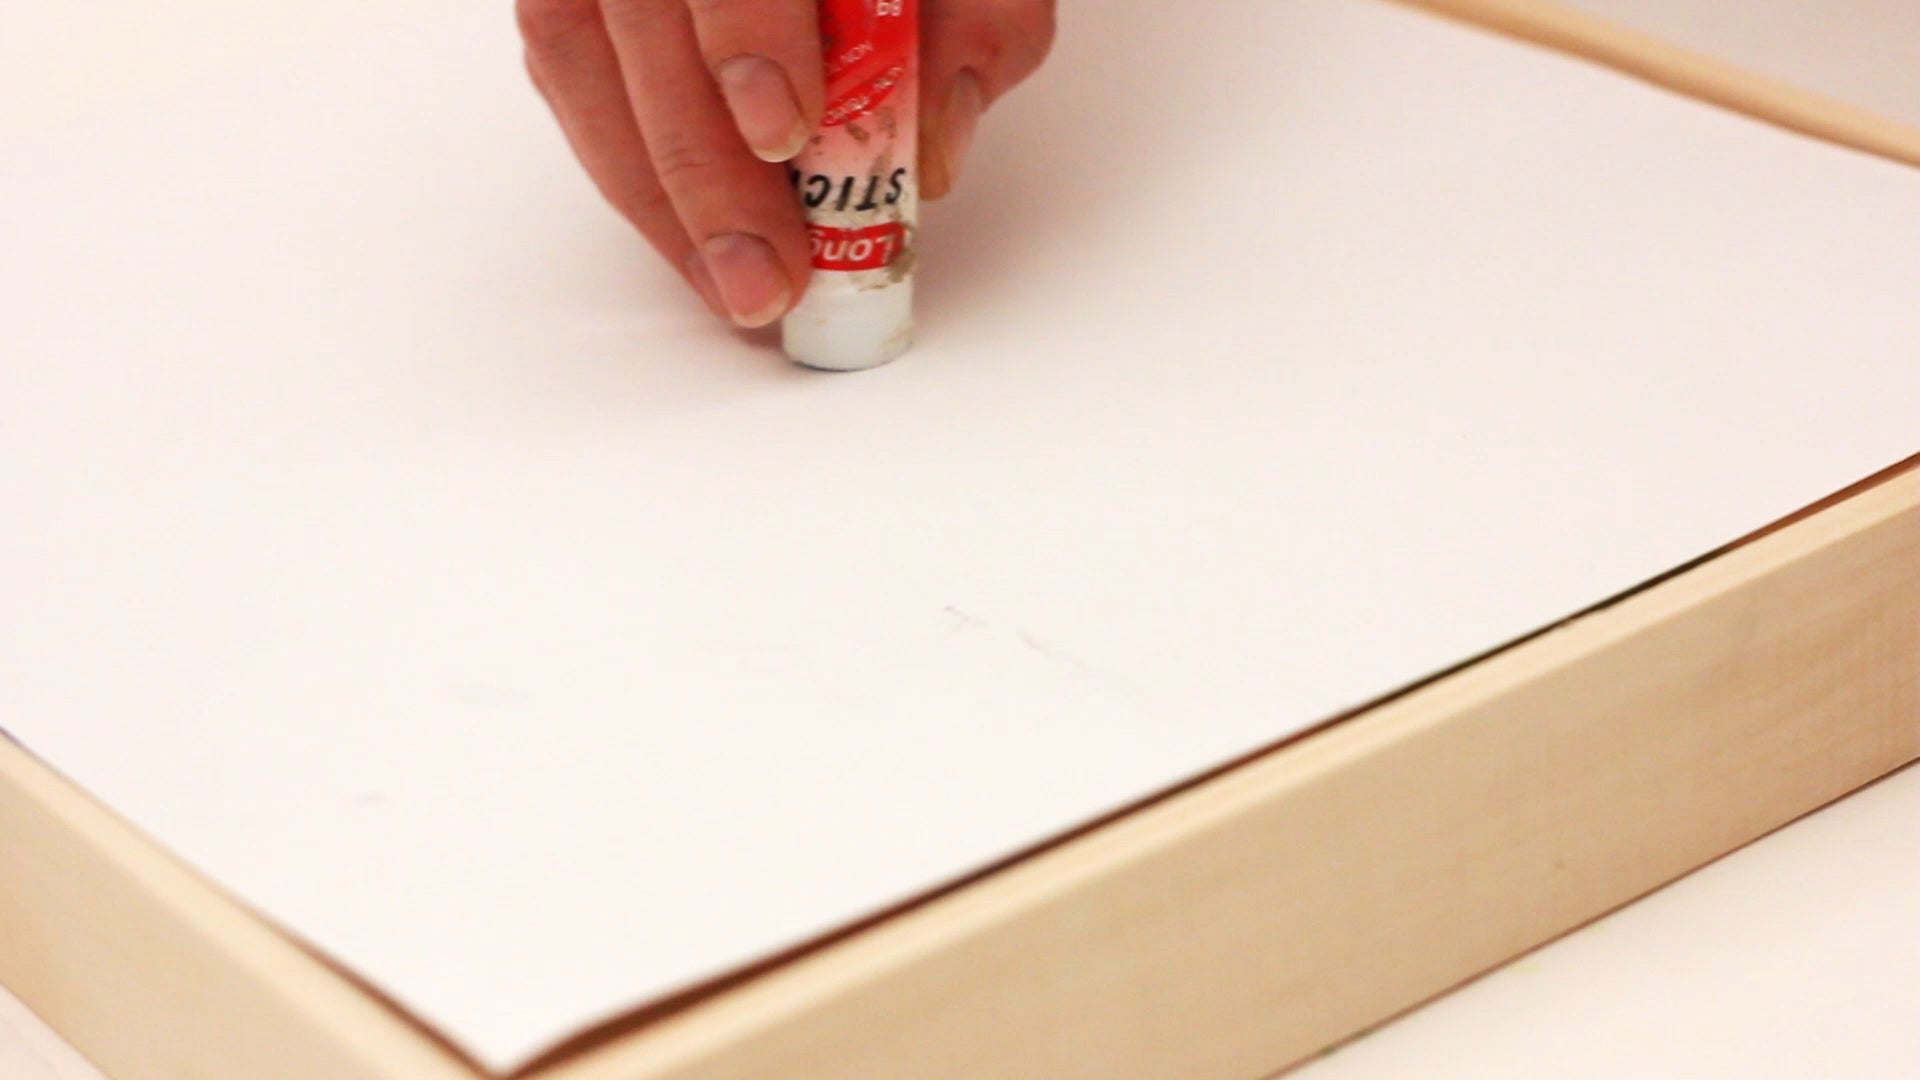 Resin Pencil Crayon- using either a glue stick or spray adhesive